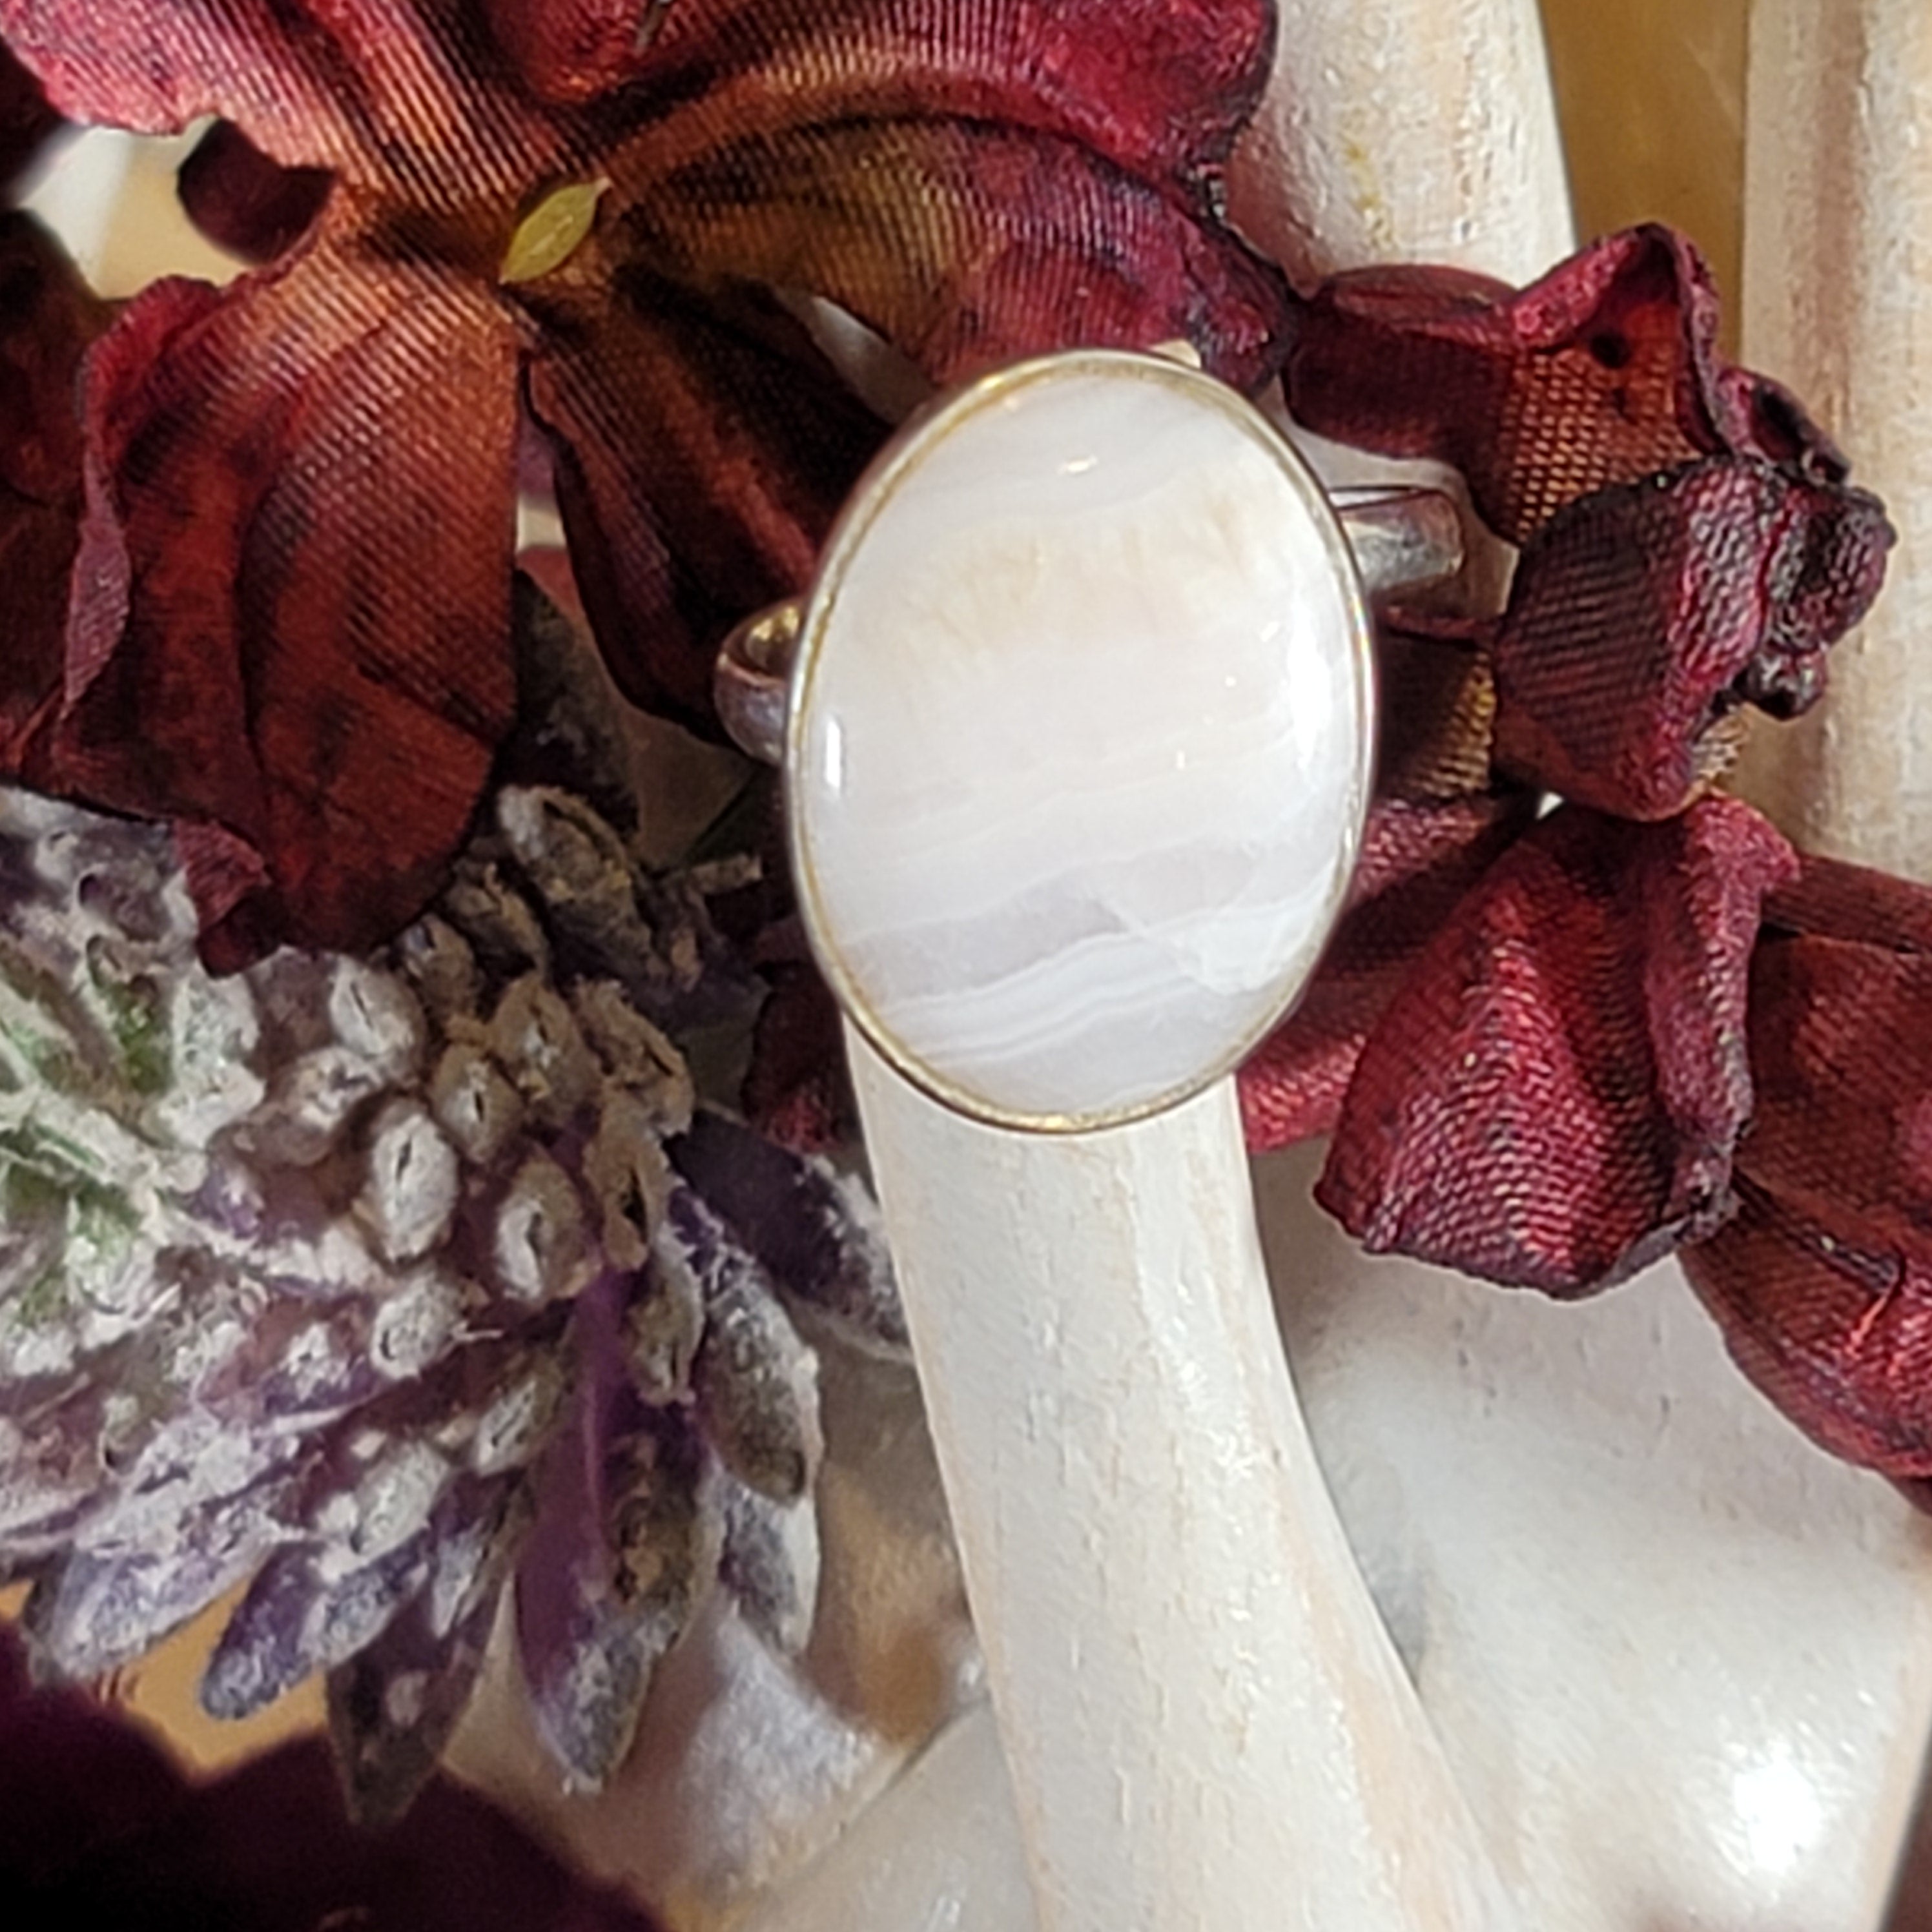 Pink Calcite Adjustable Ring .925 Silver for Compassion, Conflict Resolution and Emotional Healing